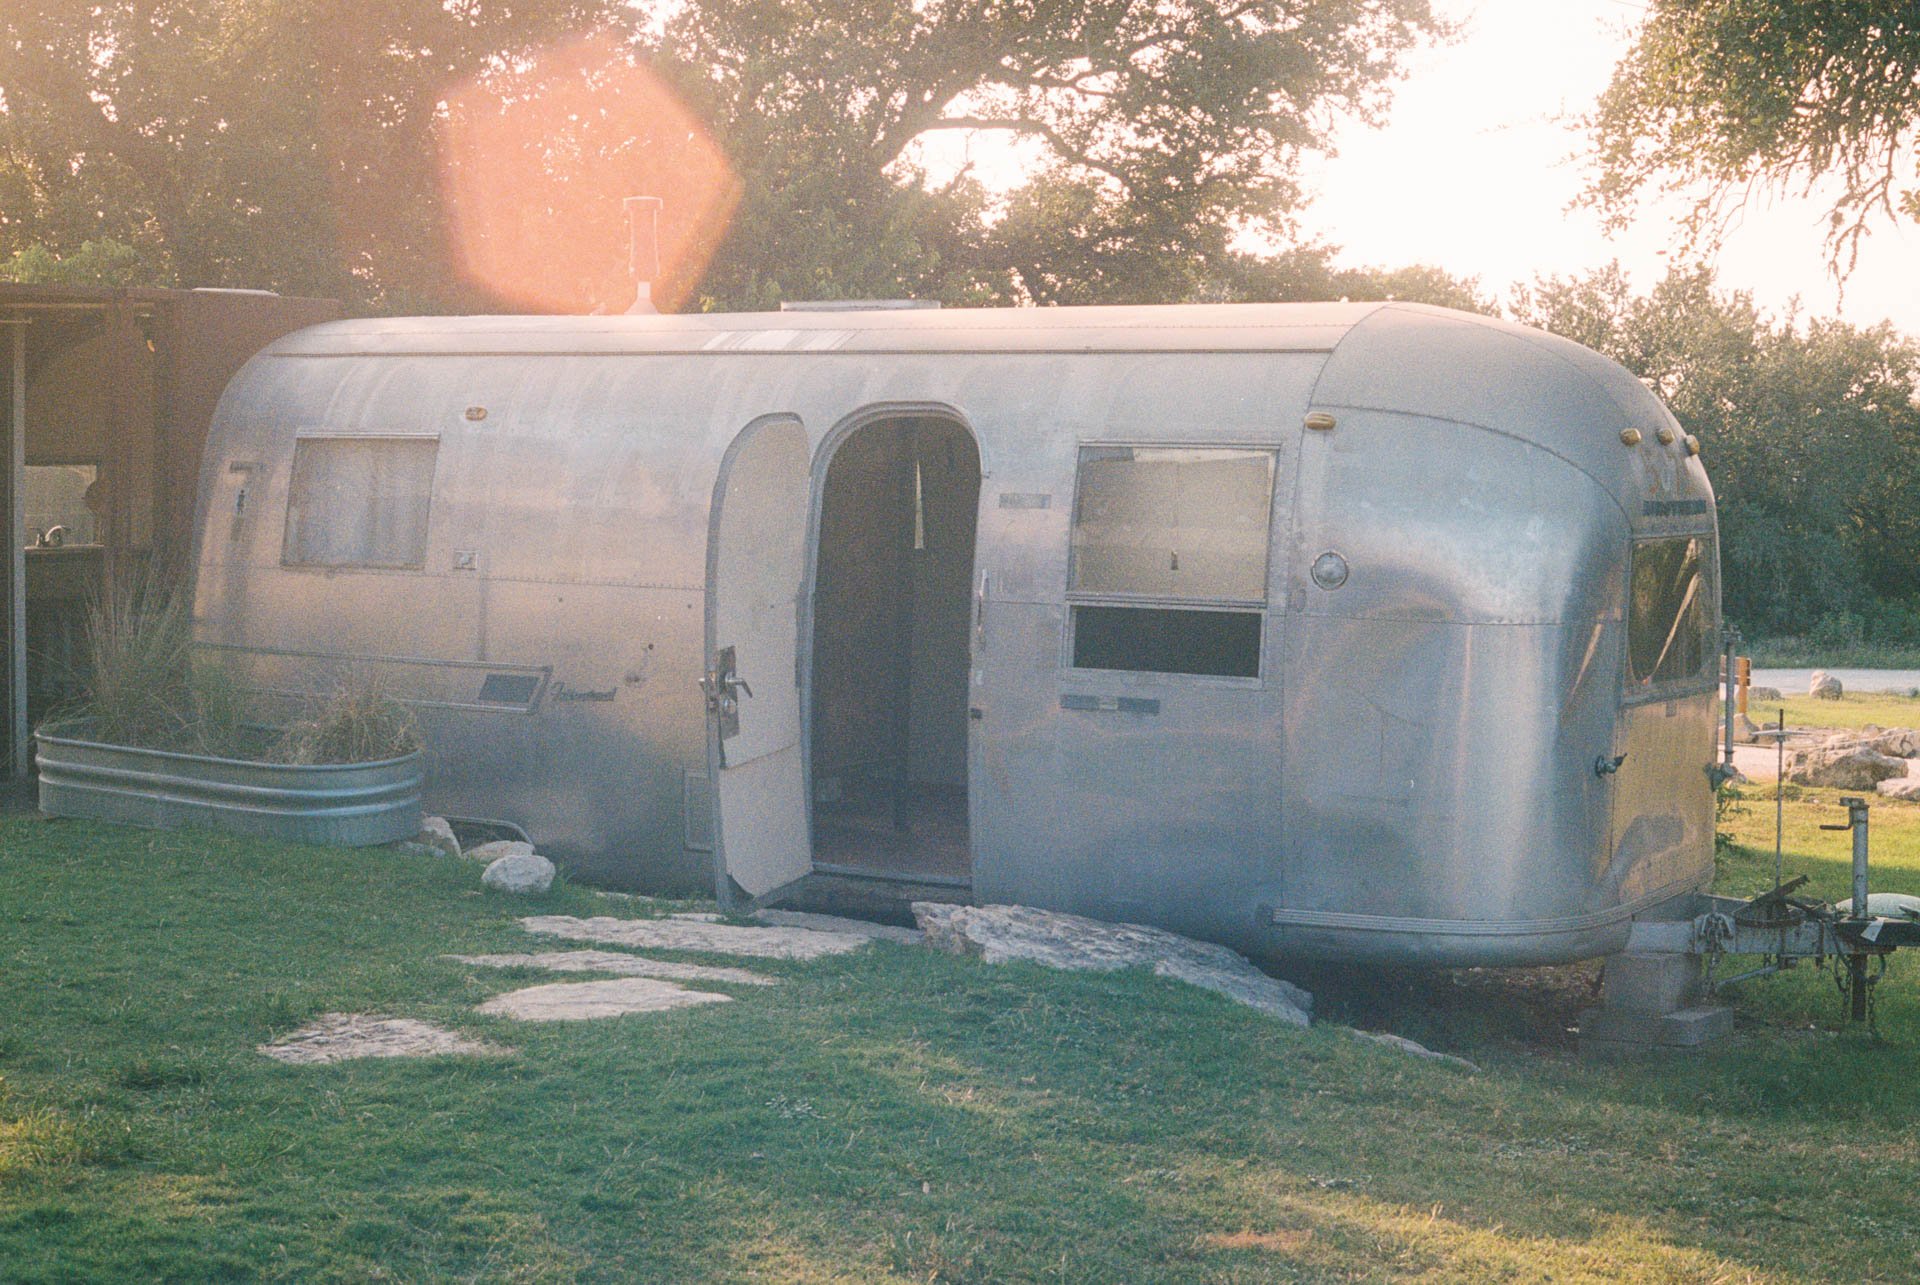 Airstream-at-Jester-King-Brewing-in-Texas-on-Film.jpg